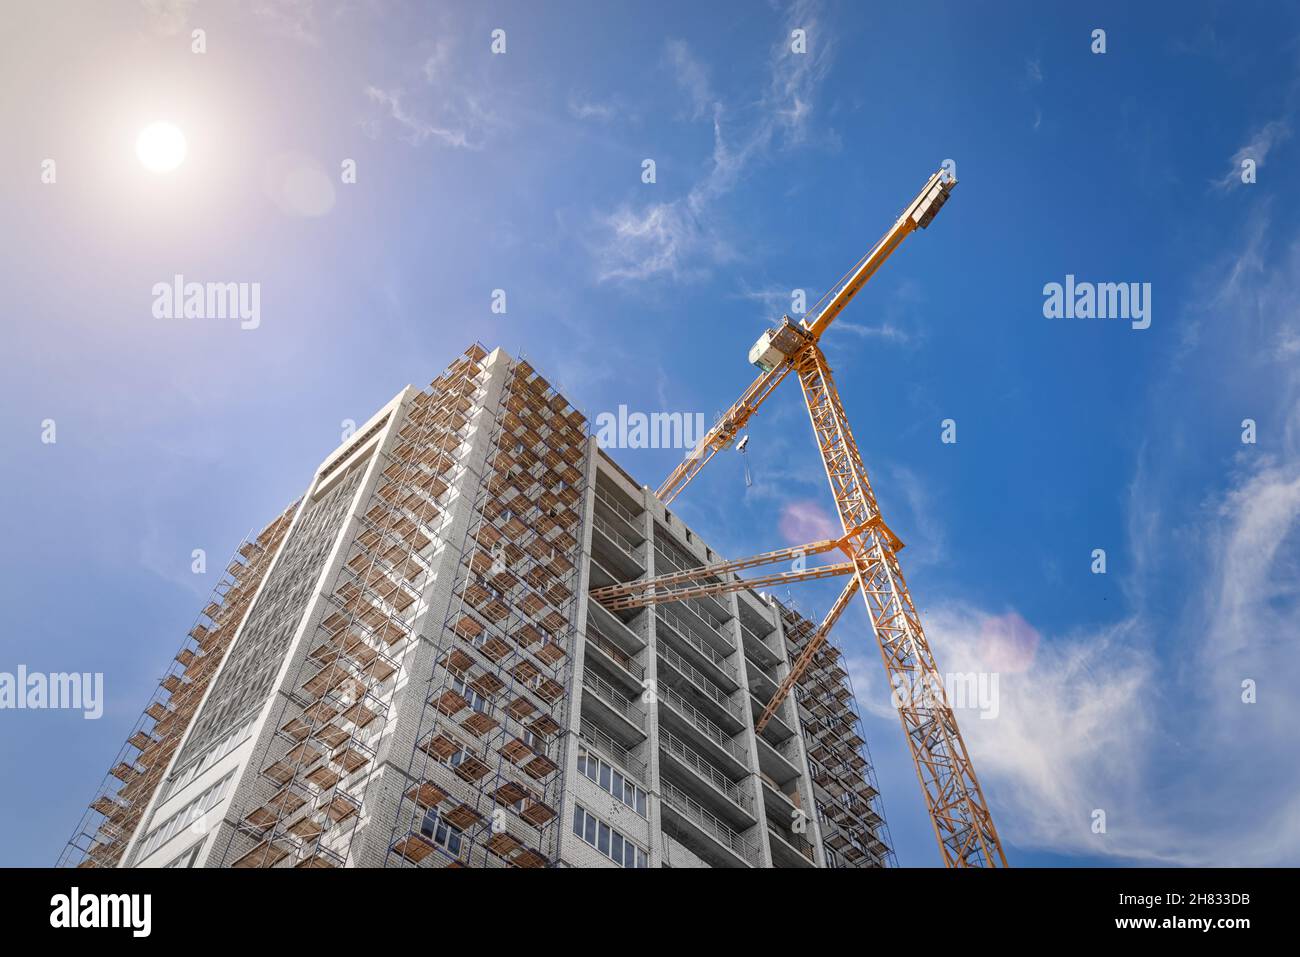 Construction site of modern building Stock Photo